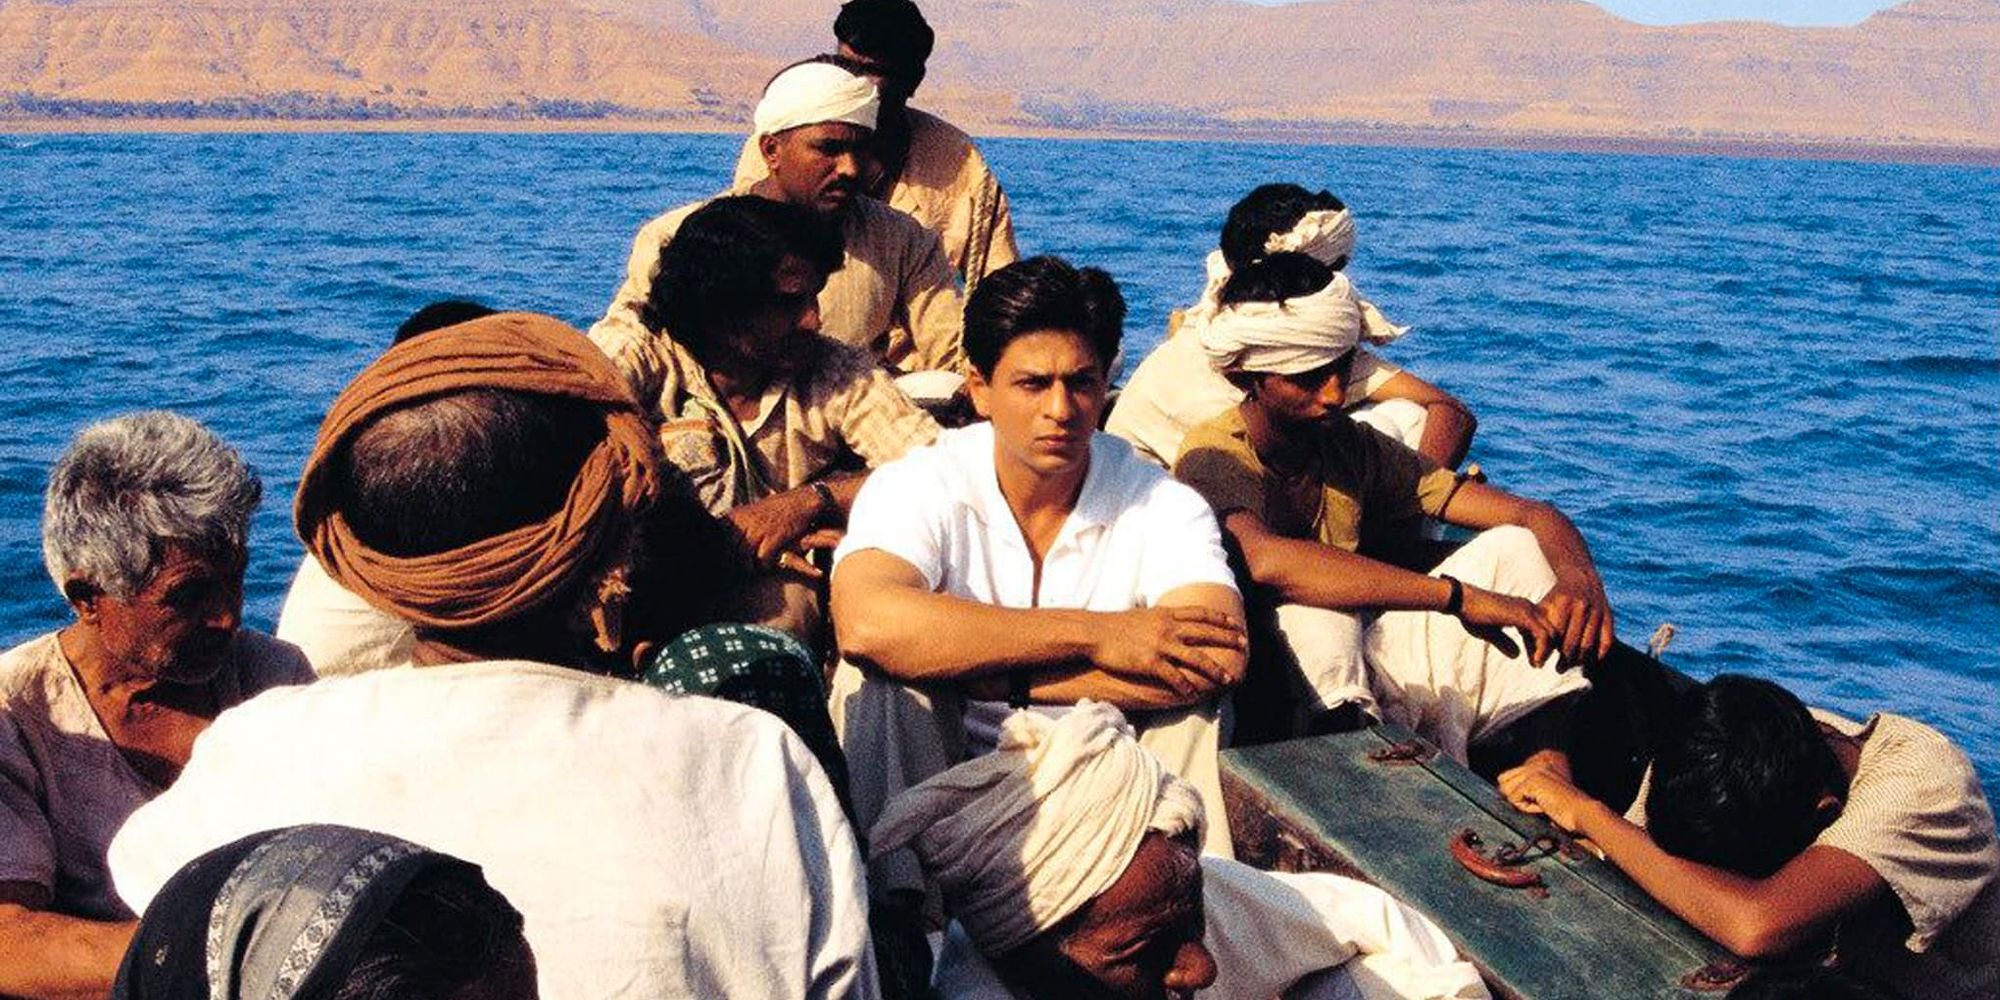 Shah Rukh Khan in a boat with other men in Swades